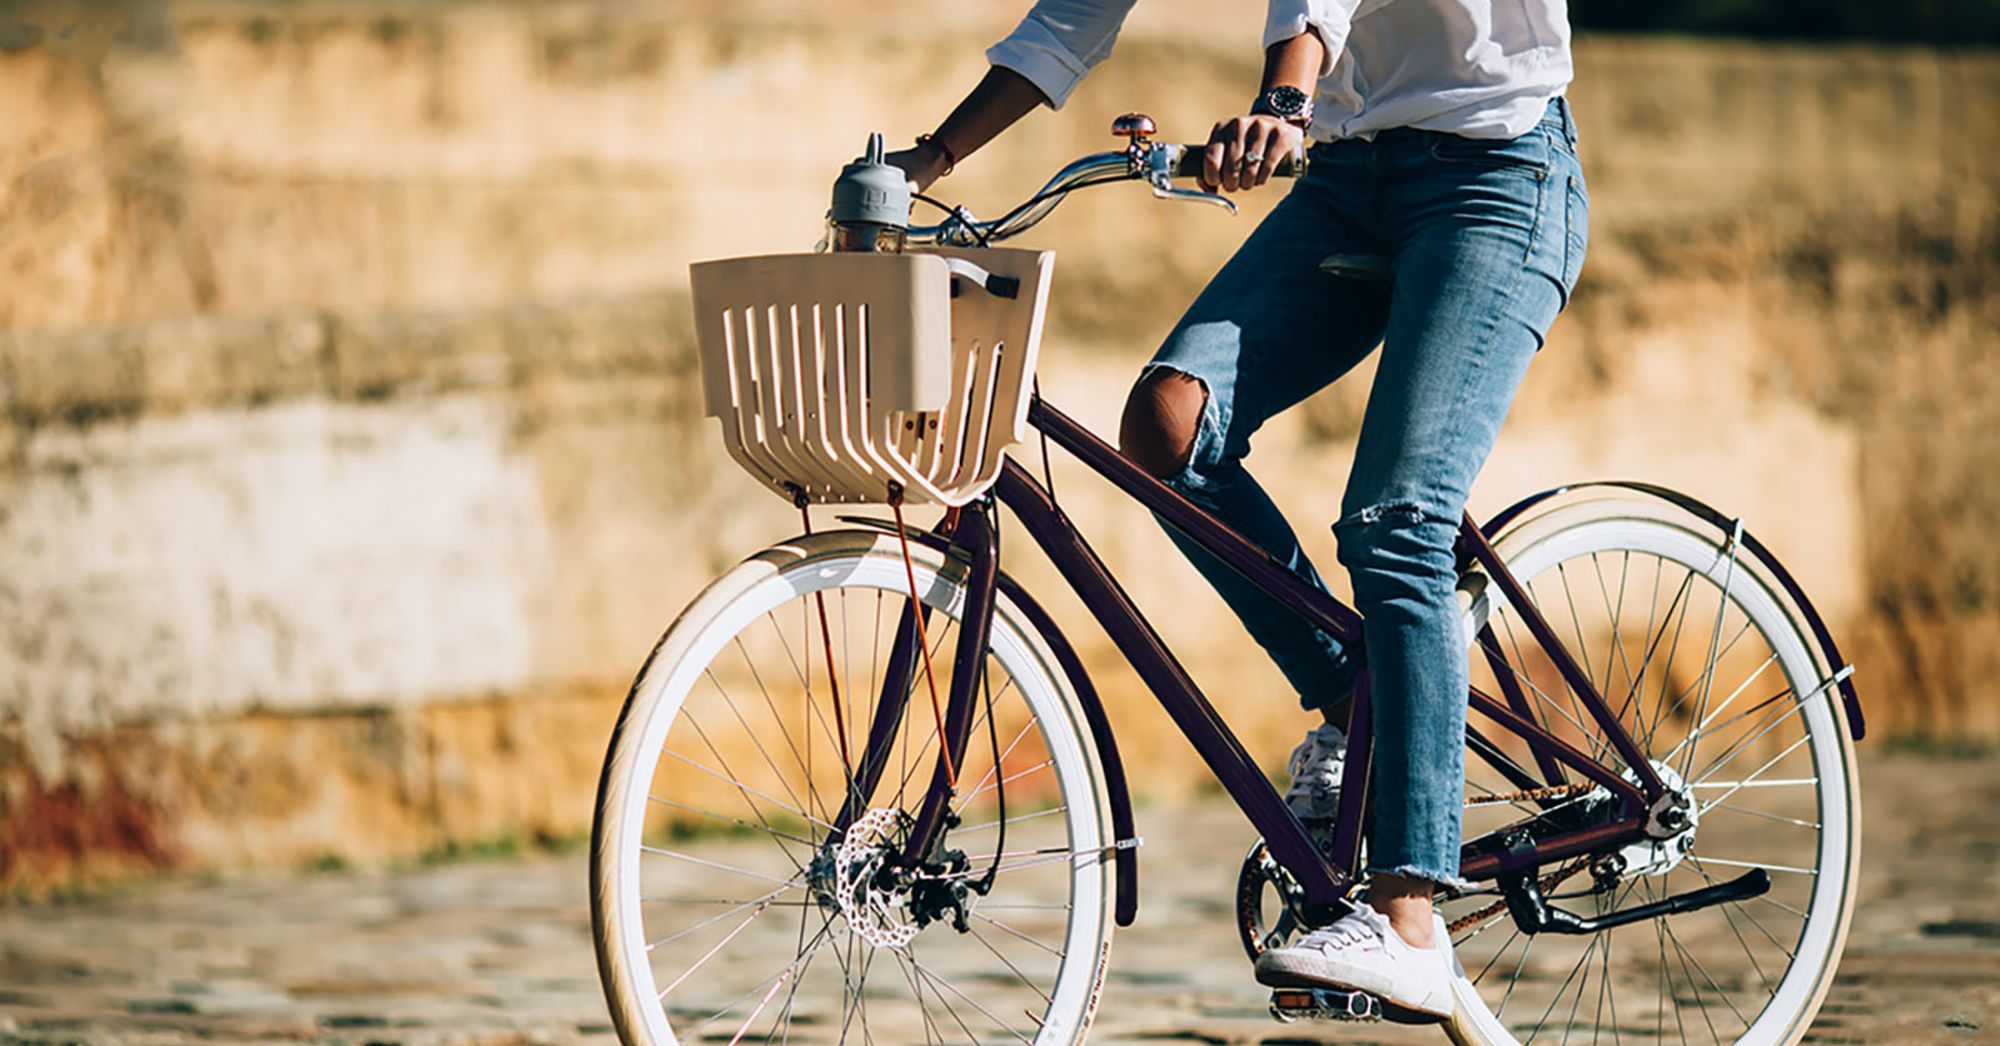 You can now buy a bike made from recycled Nespresso pods | CNN